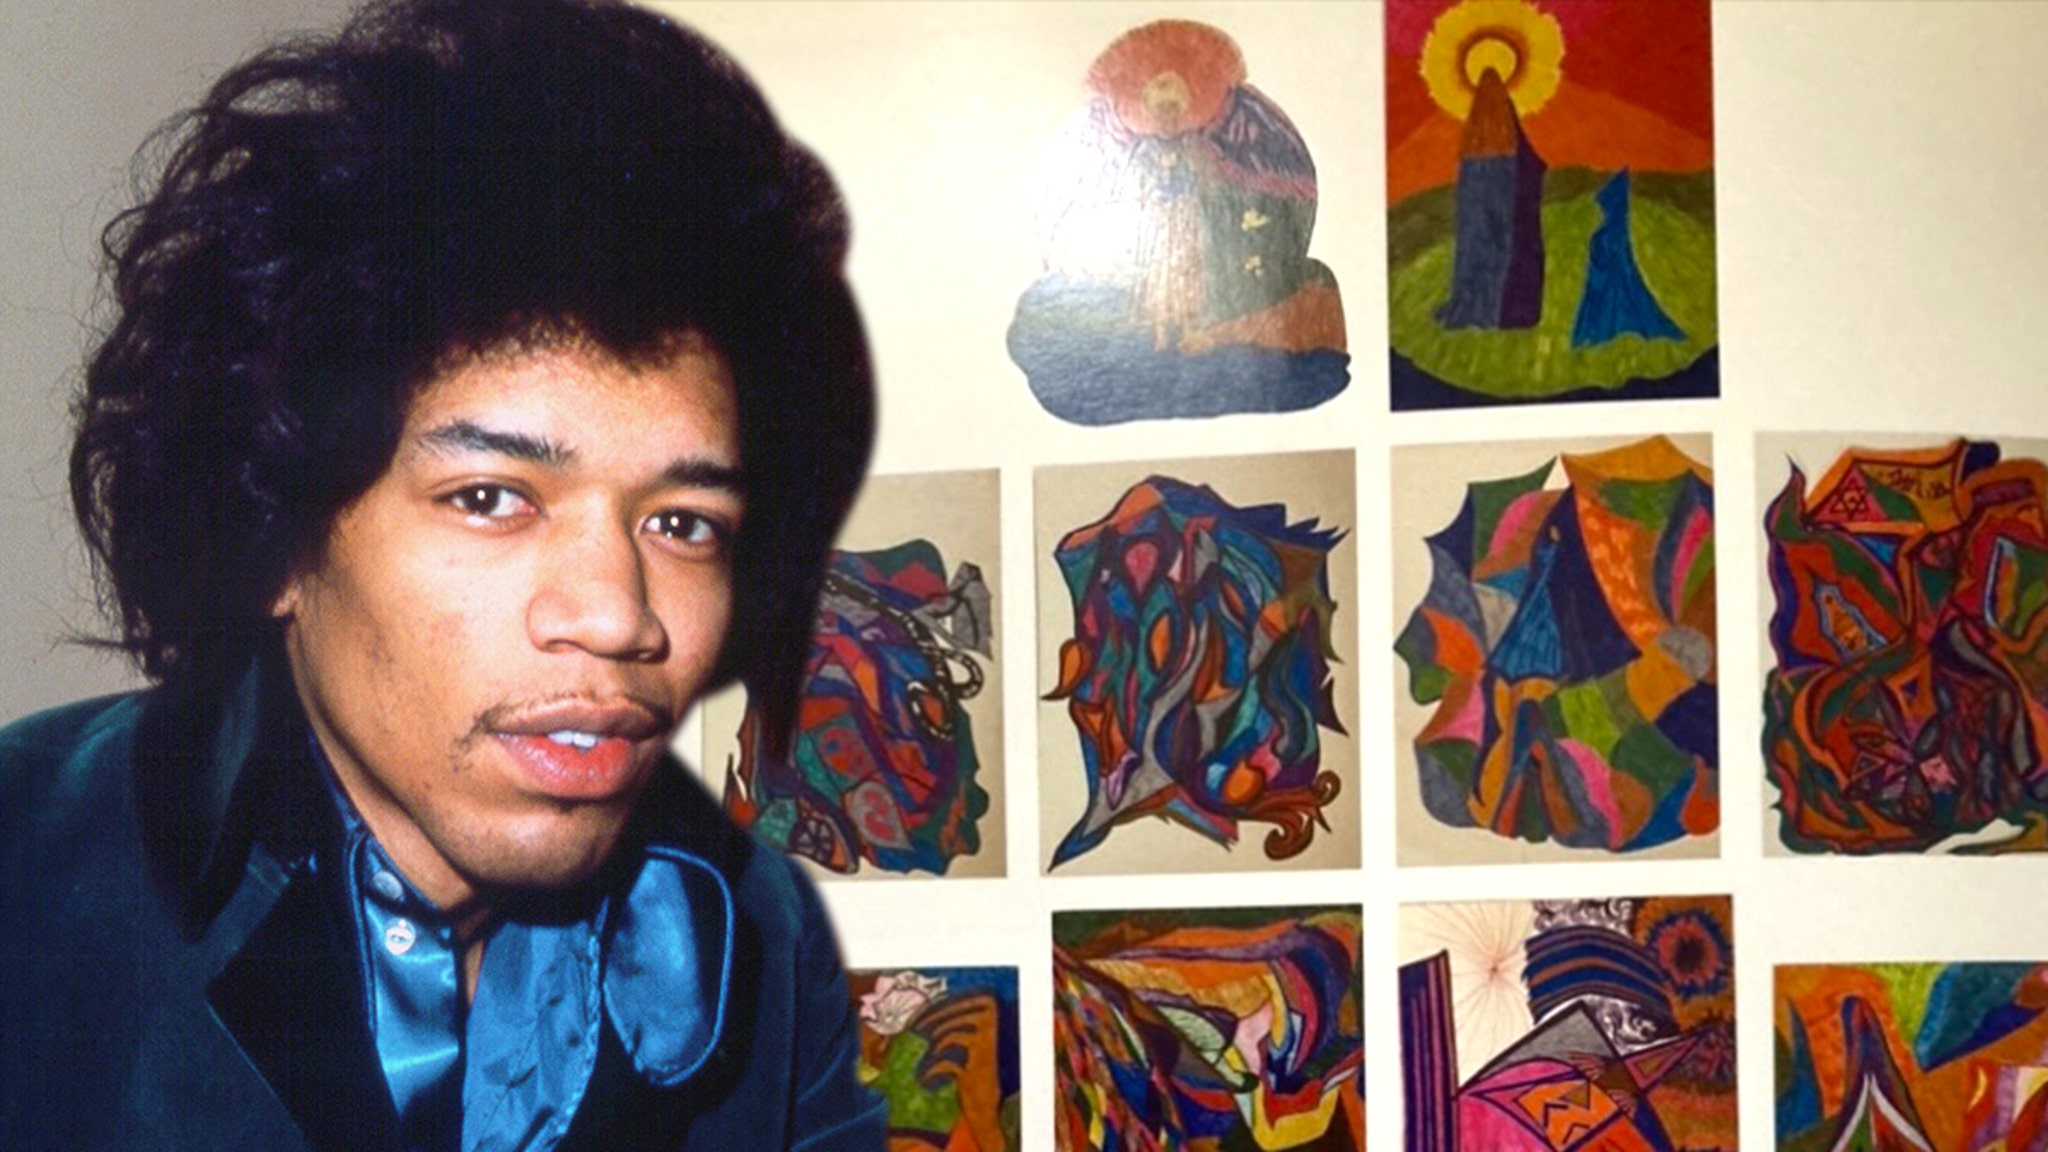 Jimi Hendrix’s Psychedelic Drawings From 1960s Up For Sale For $195,000